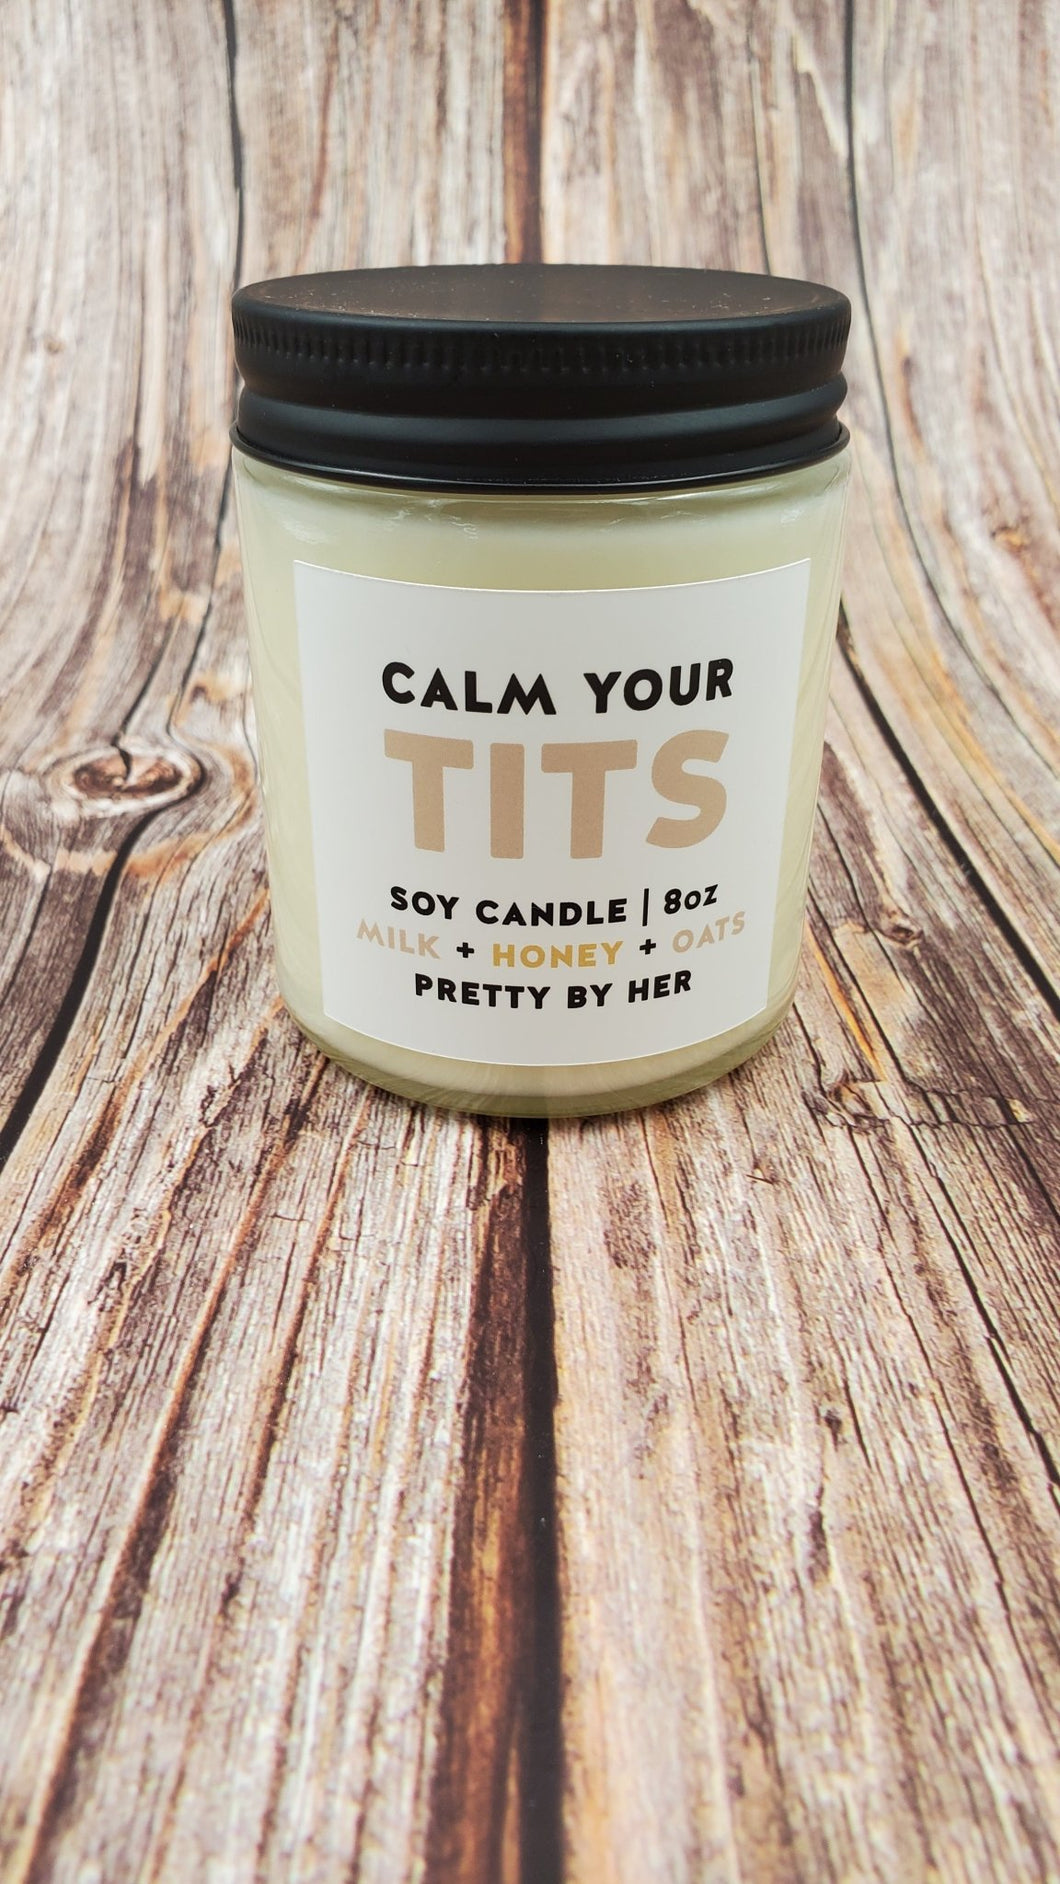 Calm your tits Candle - My Other Child / Blooms n' Rooms